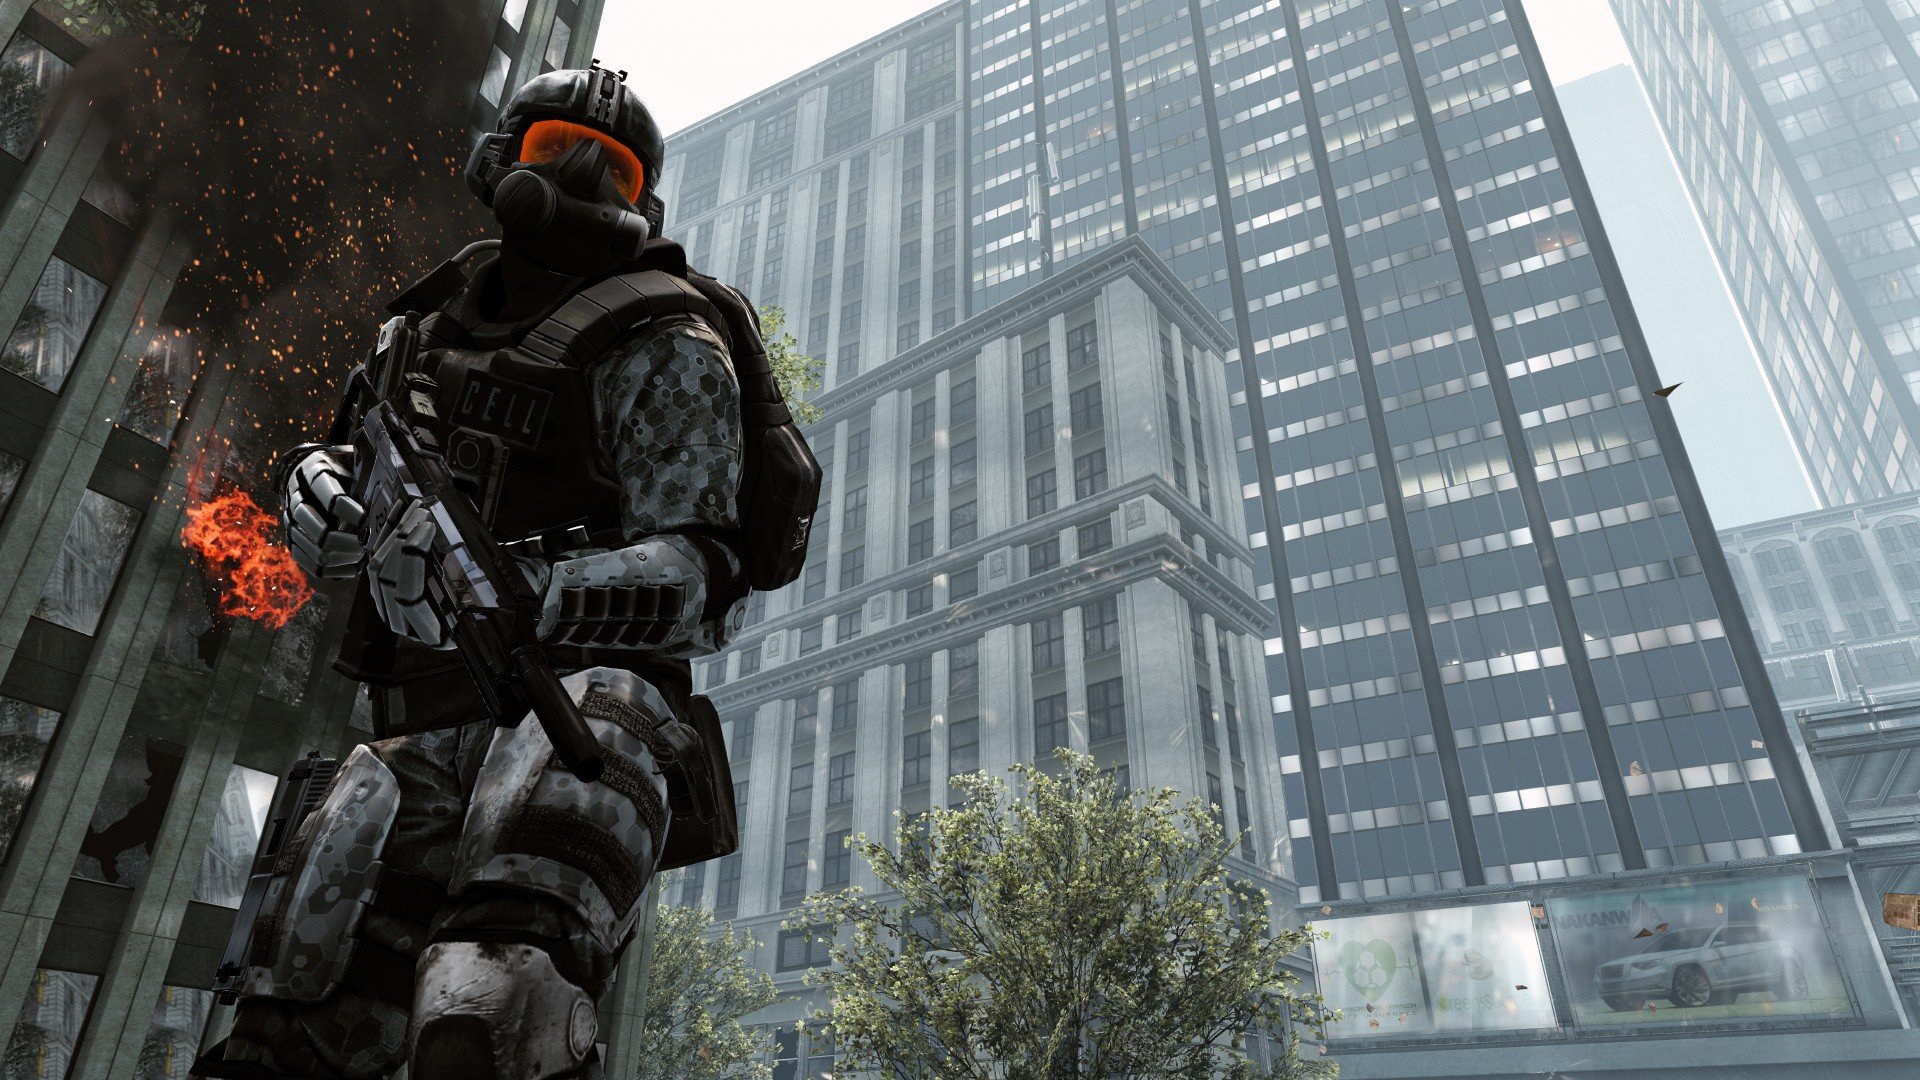 Download full hd 1920x1080 Crysis 2 computer wallpaper ID:379753 for free